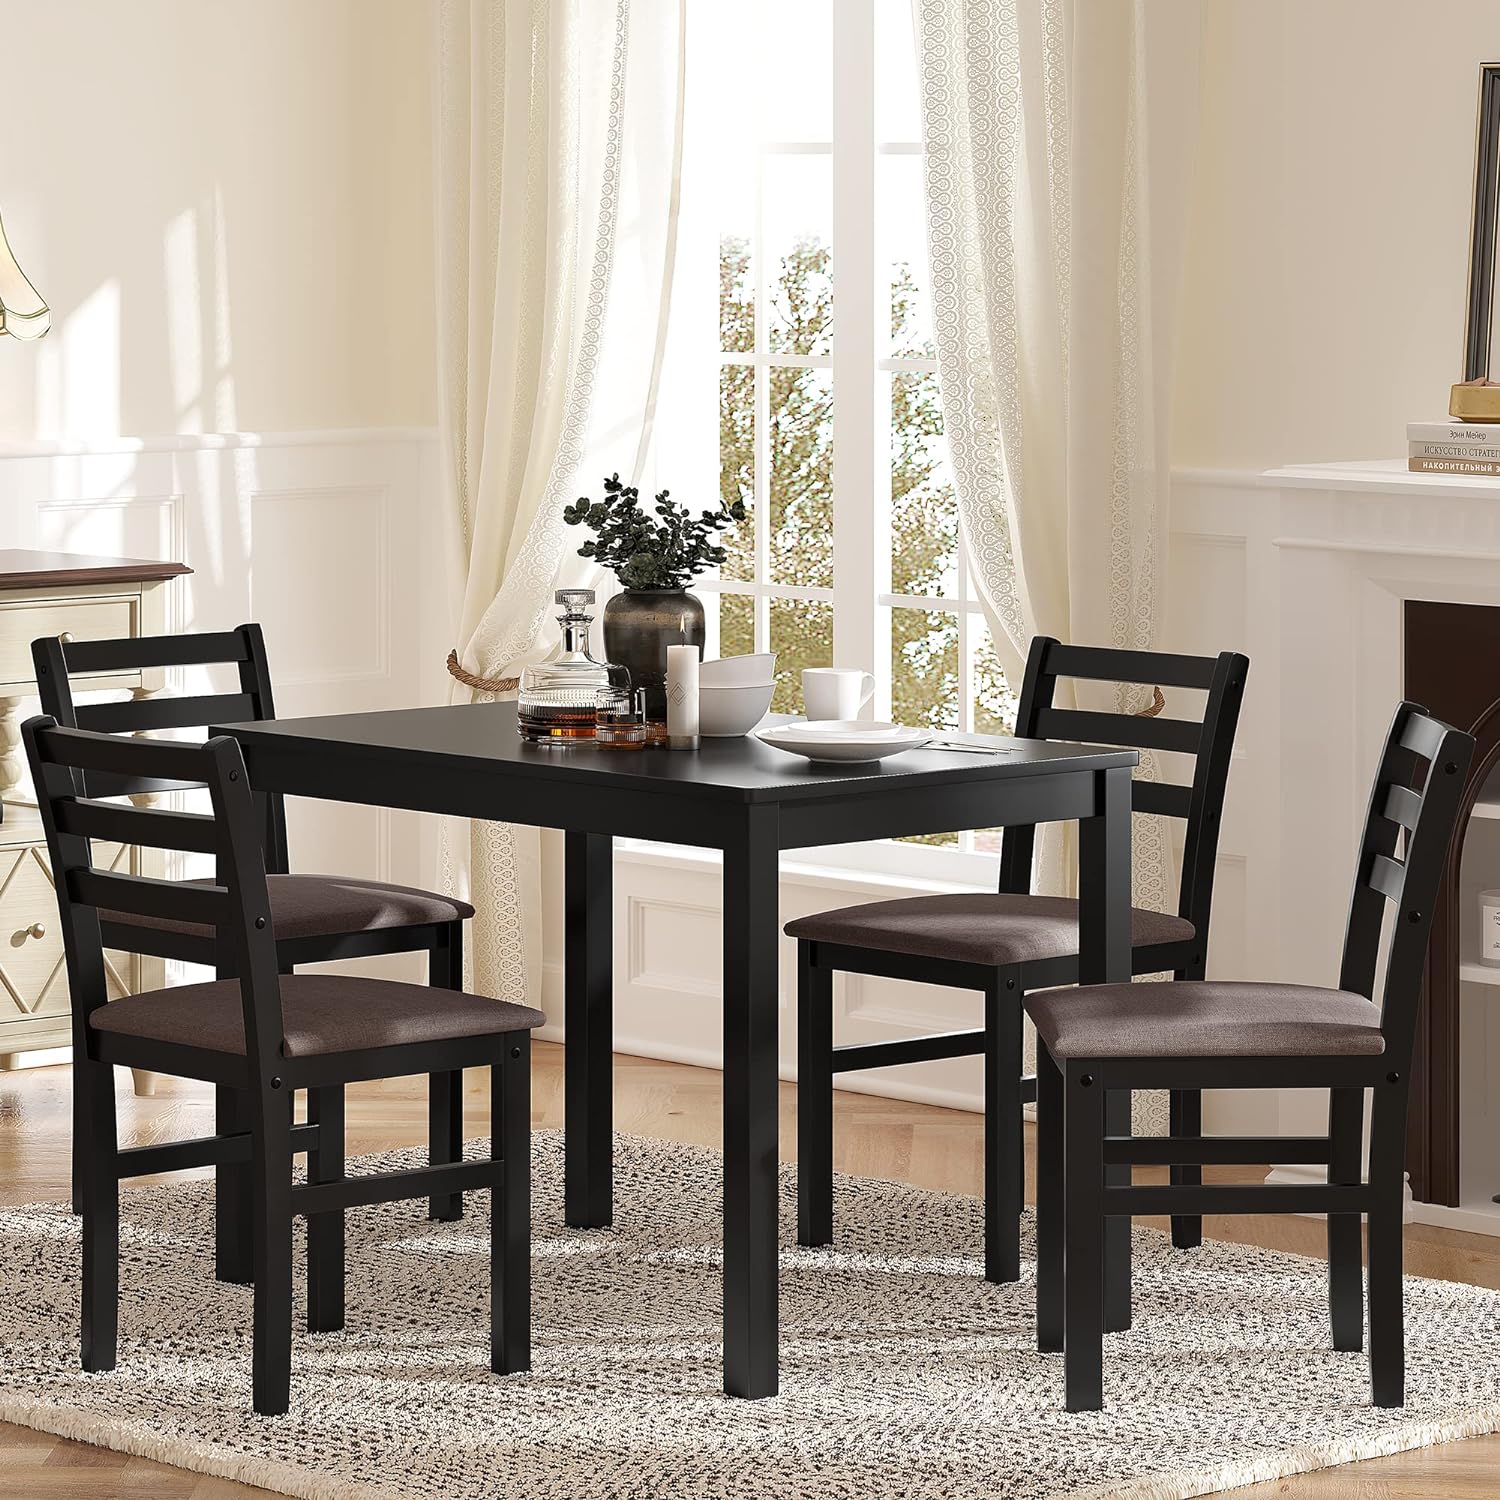 WILLIAMSPACE Dining Table Set for 4, 5-Piece Dining Table Set, 4 Upholstered Ladder Back Chairs with Brown Cushion, 43 Square Stylish Dining Table for Kitchen, Small Space (Black Brown)